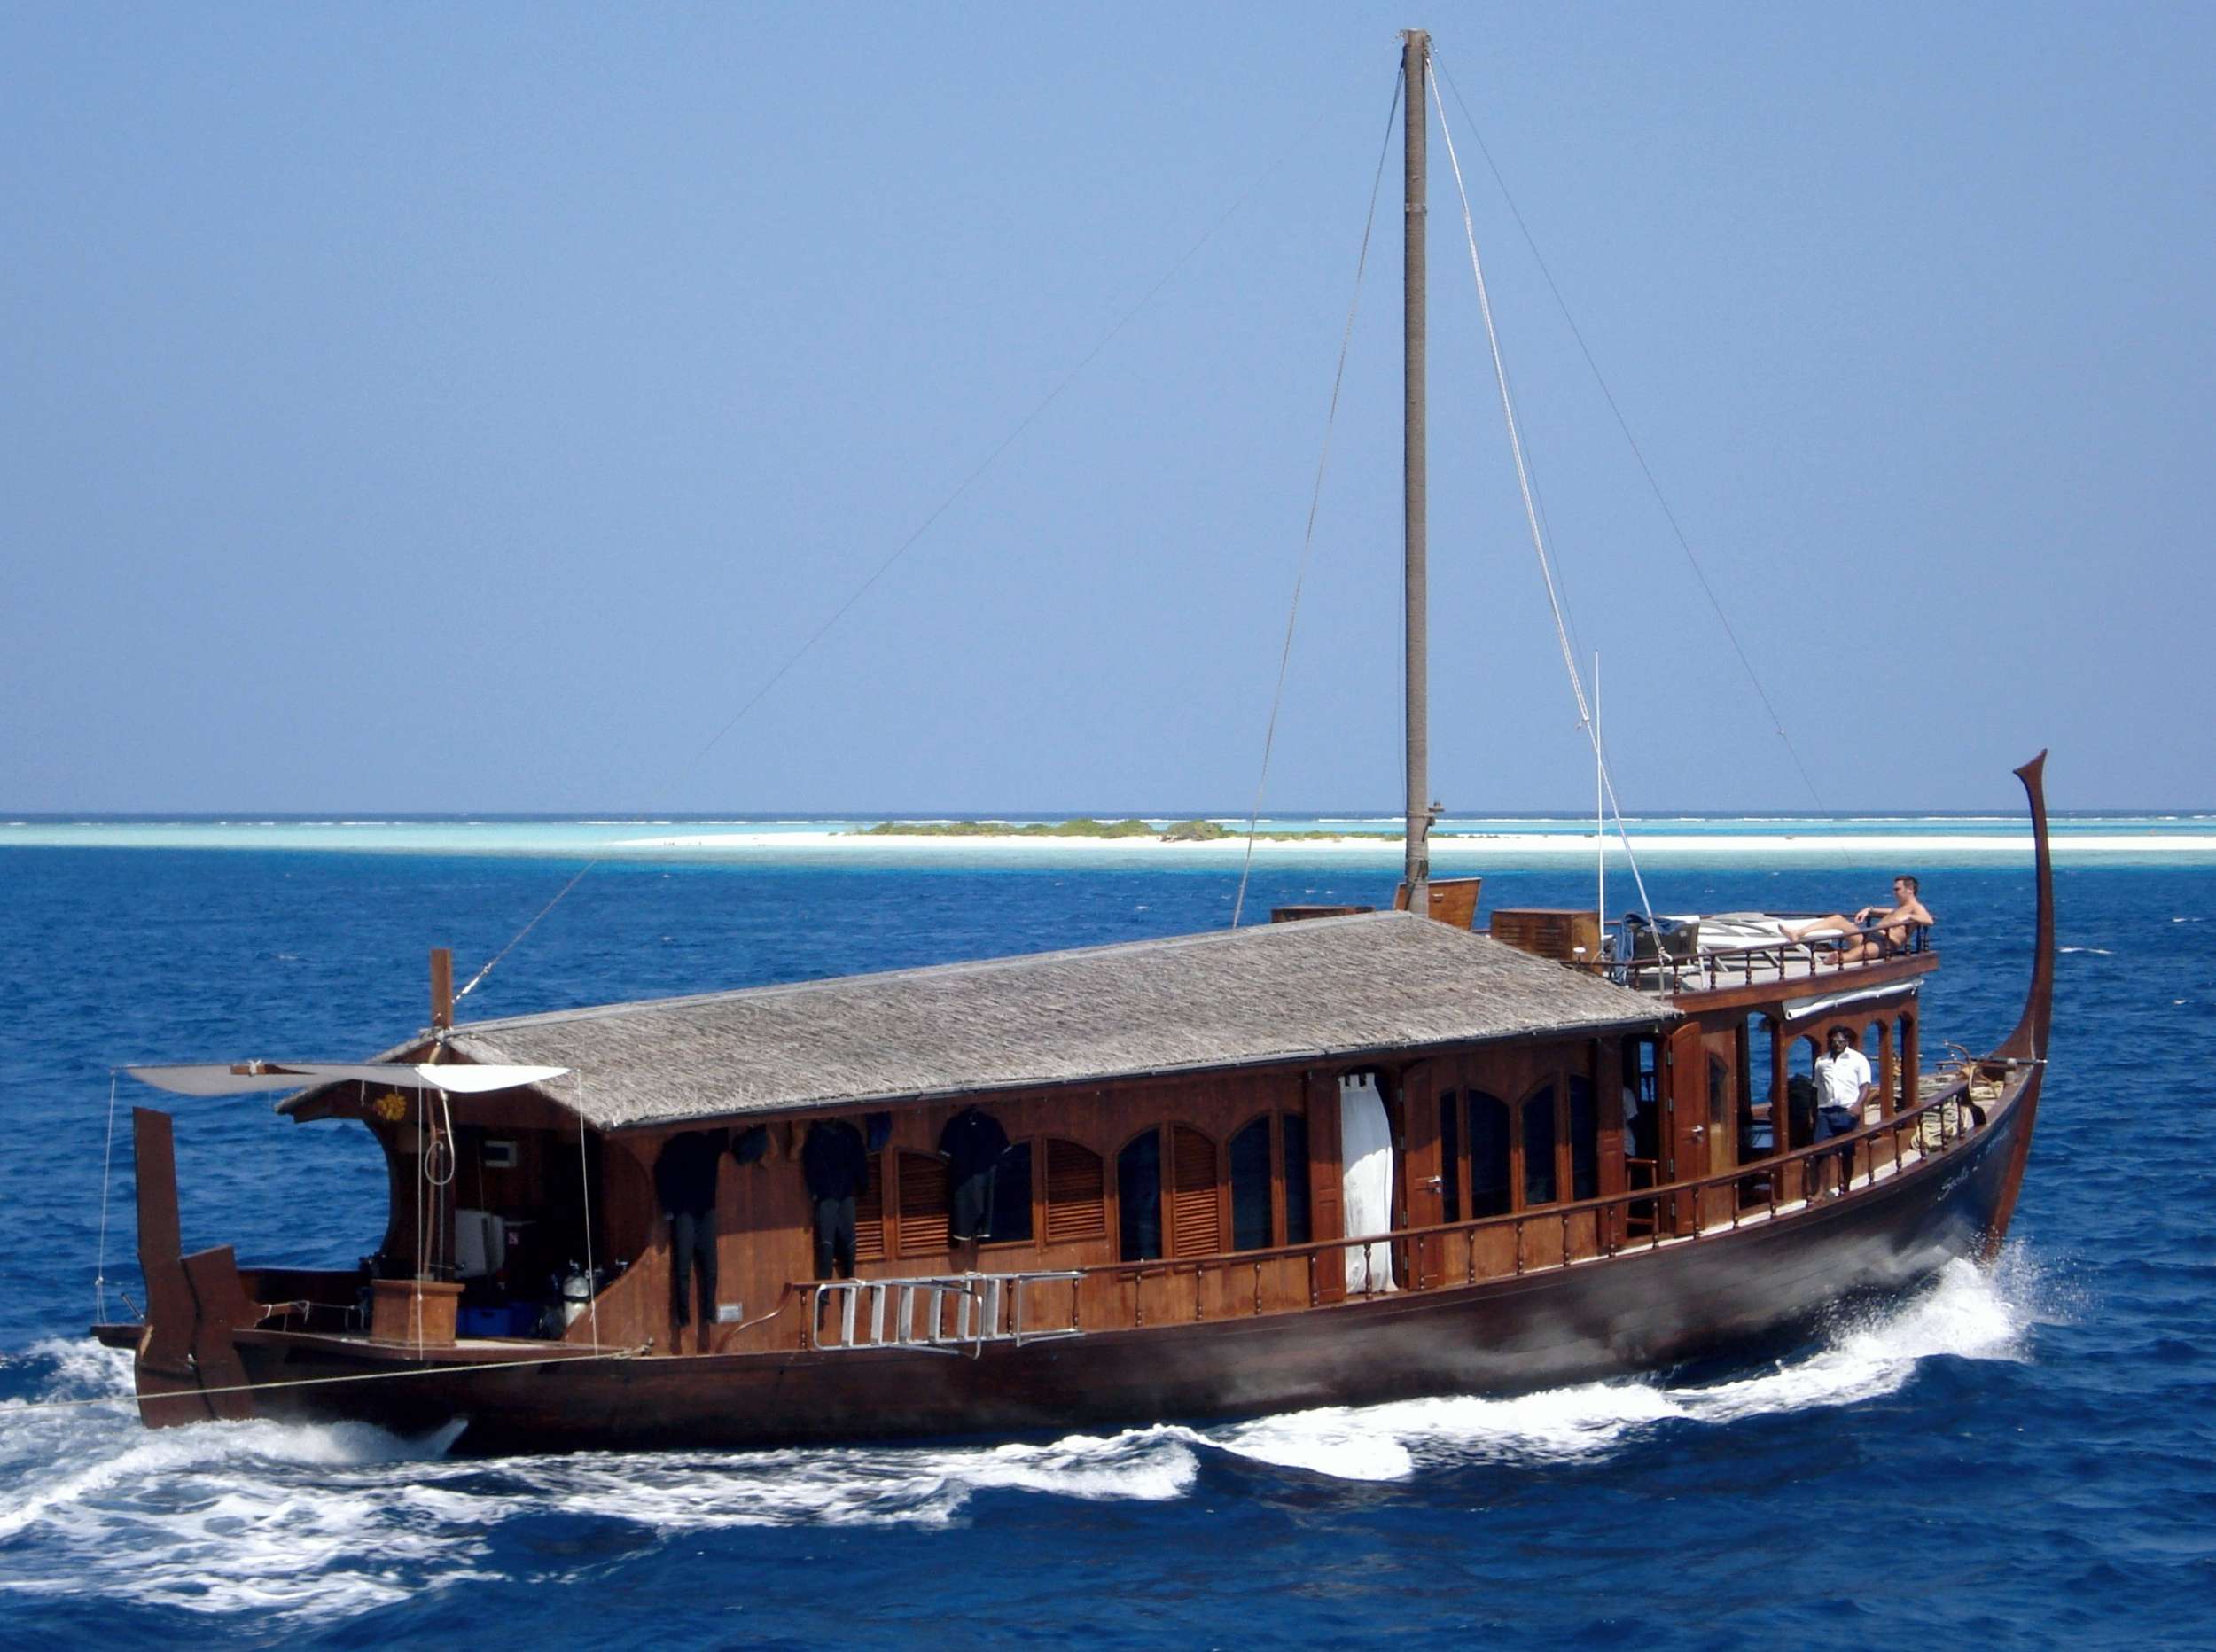 DHONI STELLA 2 - Yacht Charter Koh Samui & Boat hire in Indian Ocean & SE Asia 1